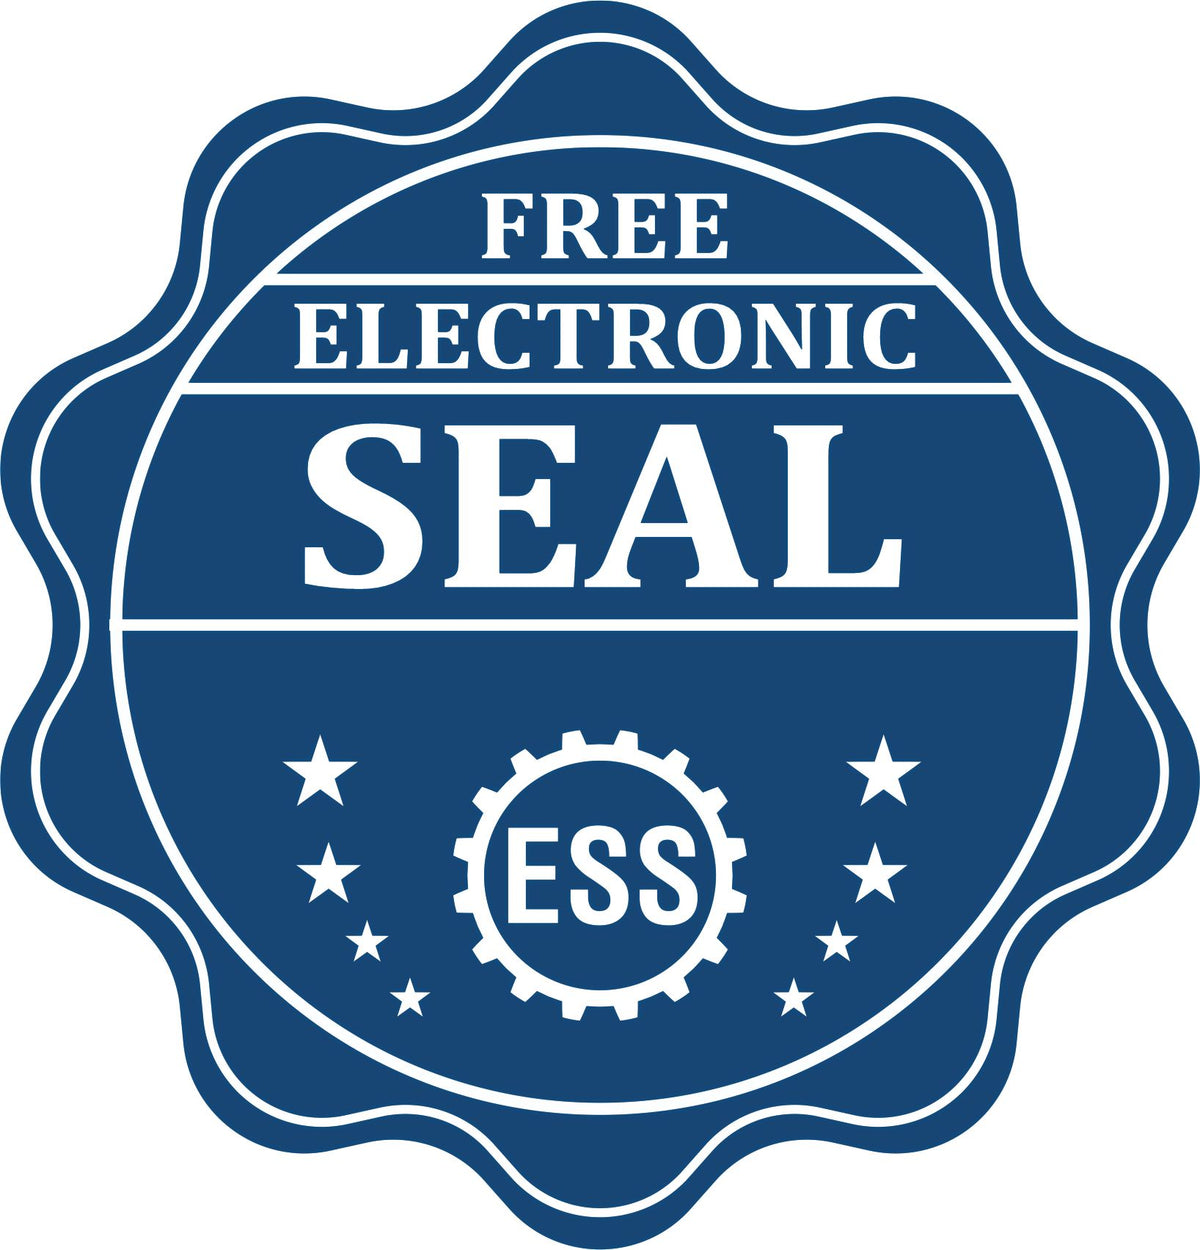 A badge showing a free electronic seal for the Heavy Duty Cast Iron Ohio Geologist Seal Embosser with stars and the ESS gear on the emblem.